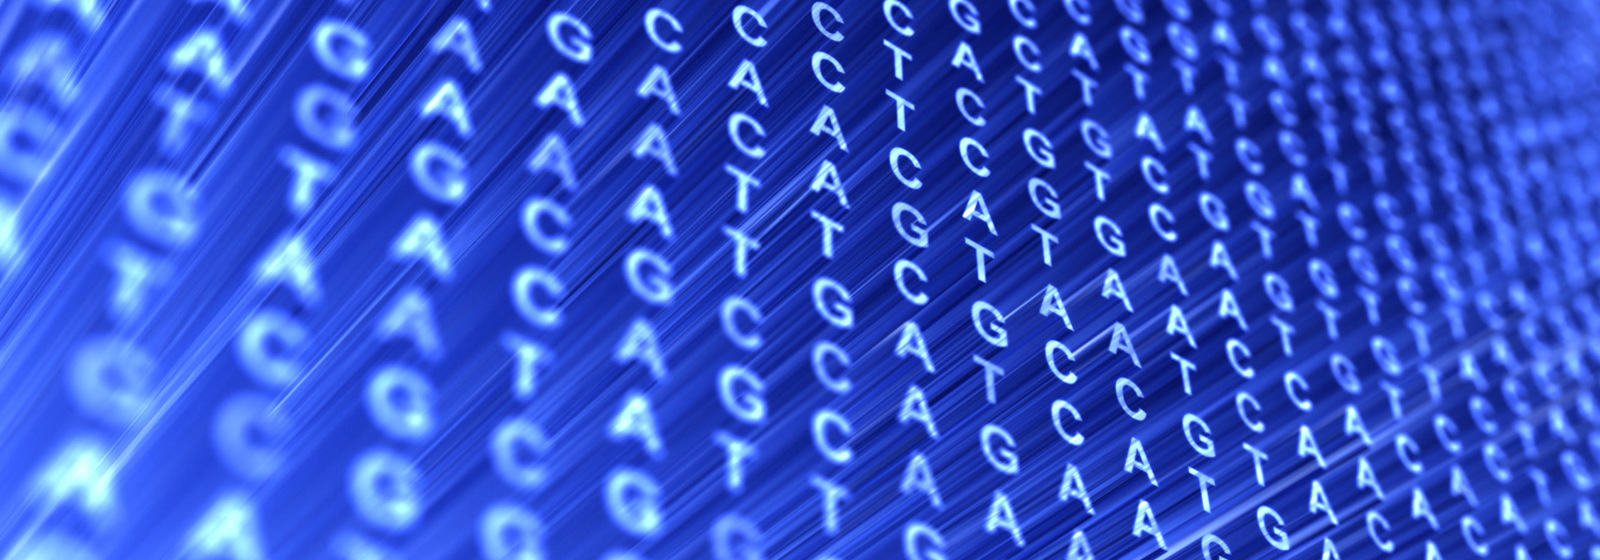 Whole Genome Sequencing